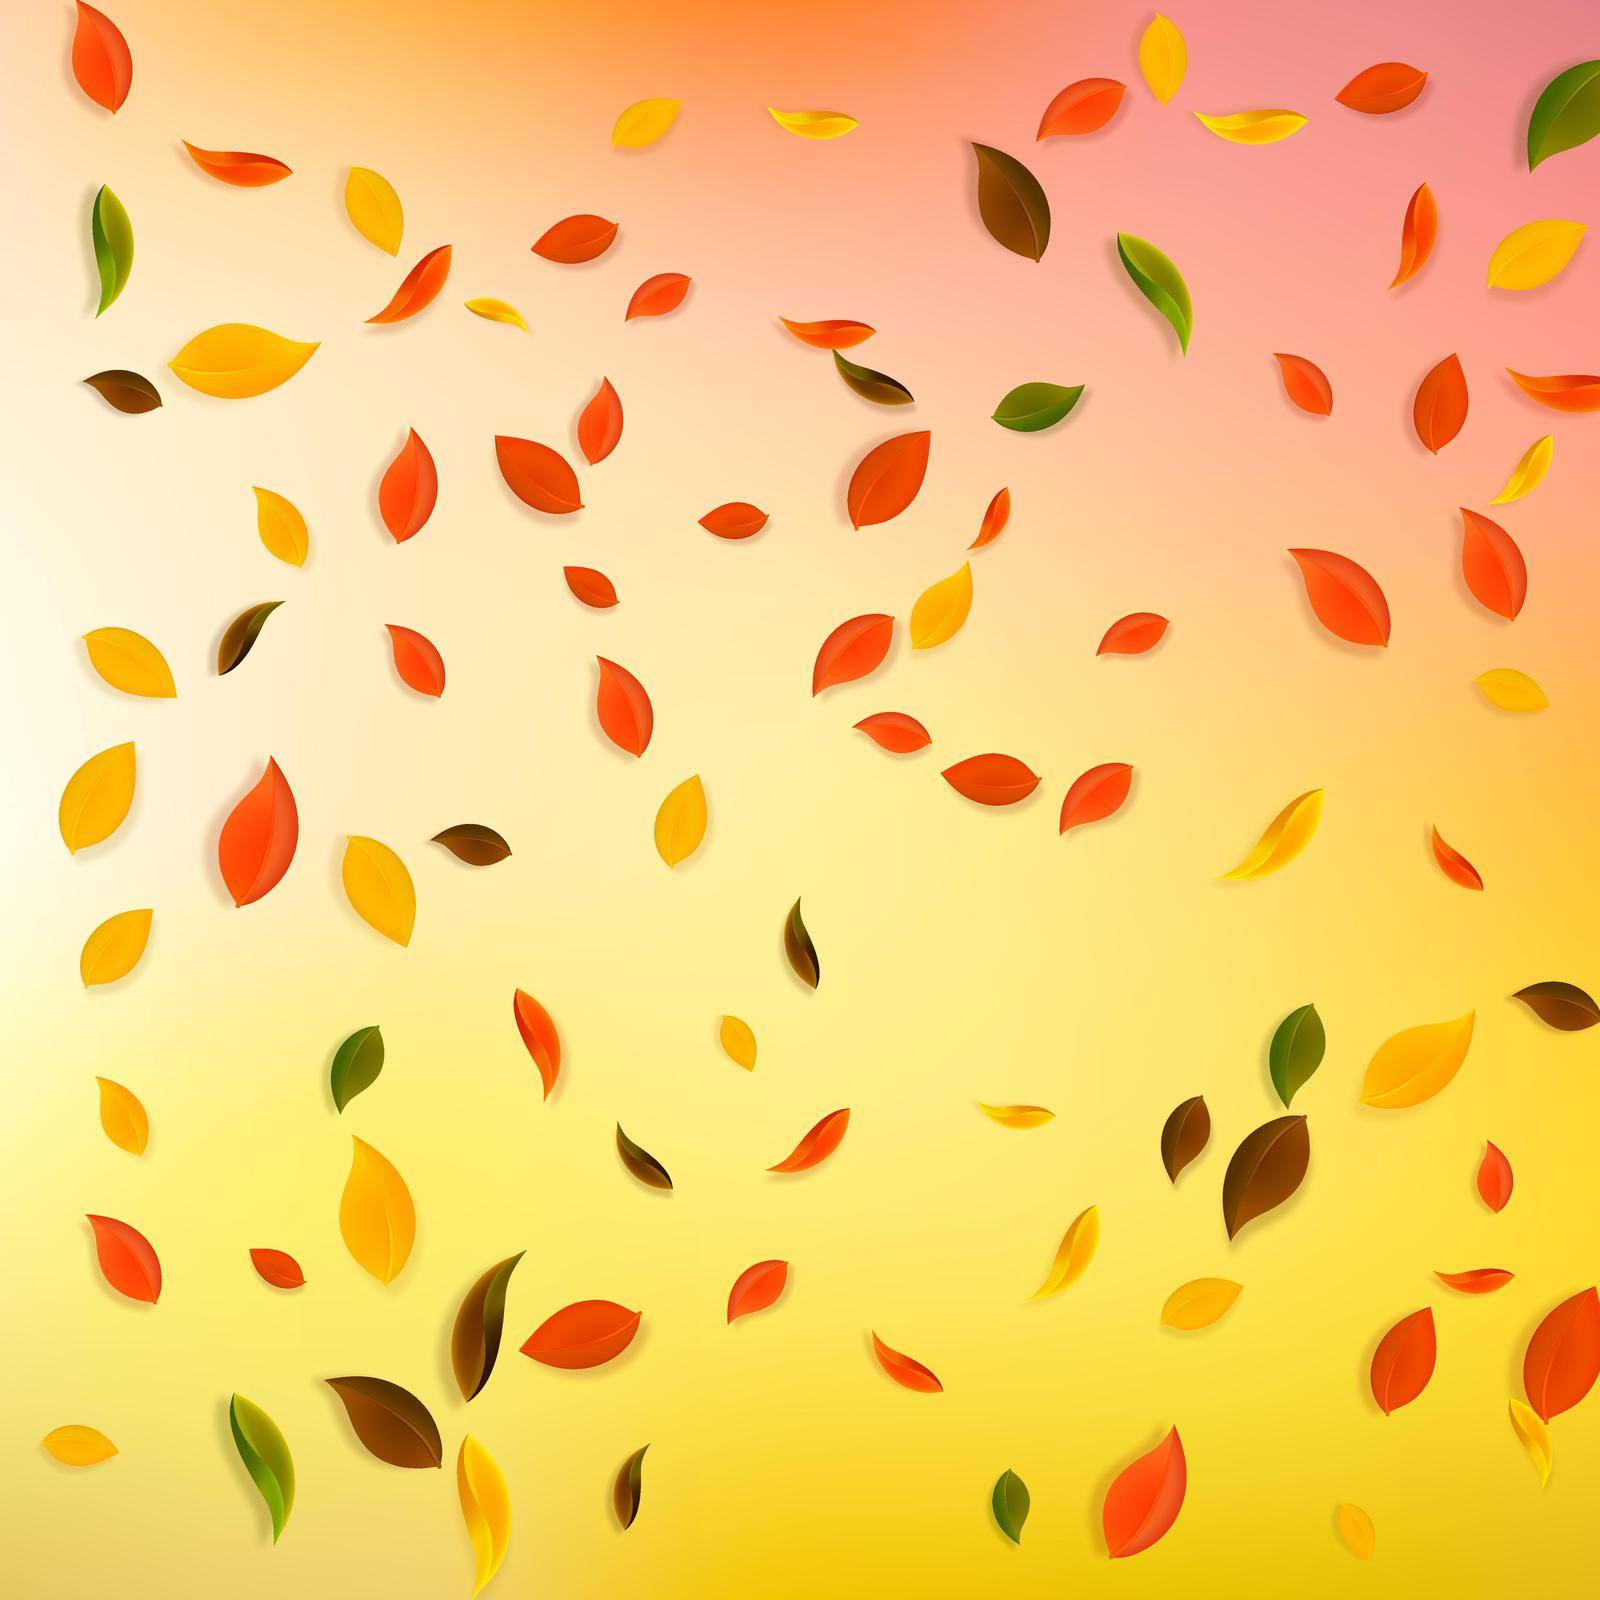 Falling autumn leaves. Red, yellow, green, brown chaotic leaves flying. Falling rain colorful foliage on brilliant white background. Breathtaking back to school sale.